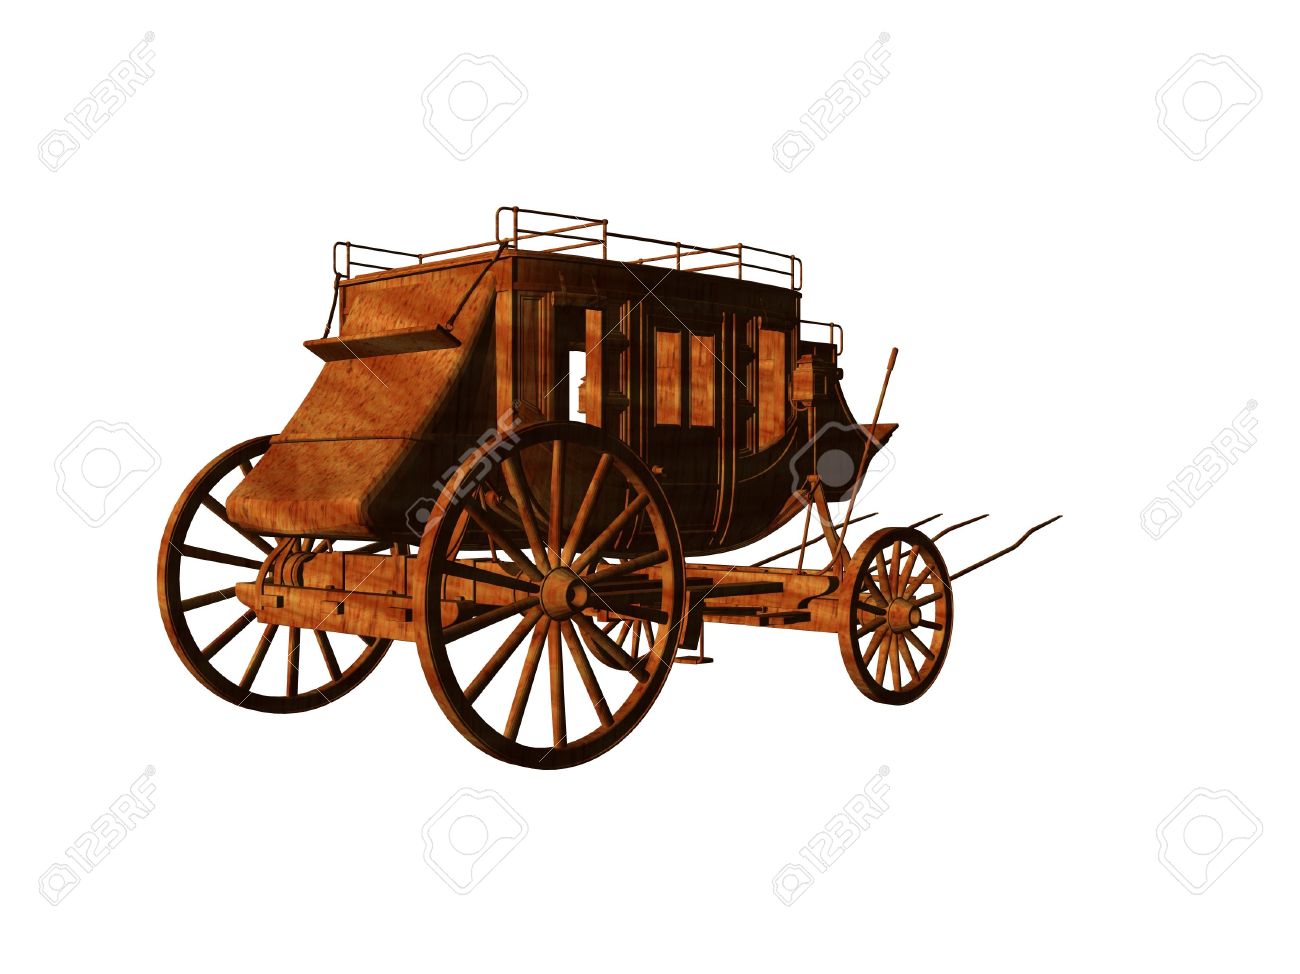 Isolated 3d Illustration Of An Old West Stagecoach Stock Photo.